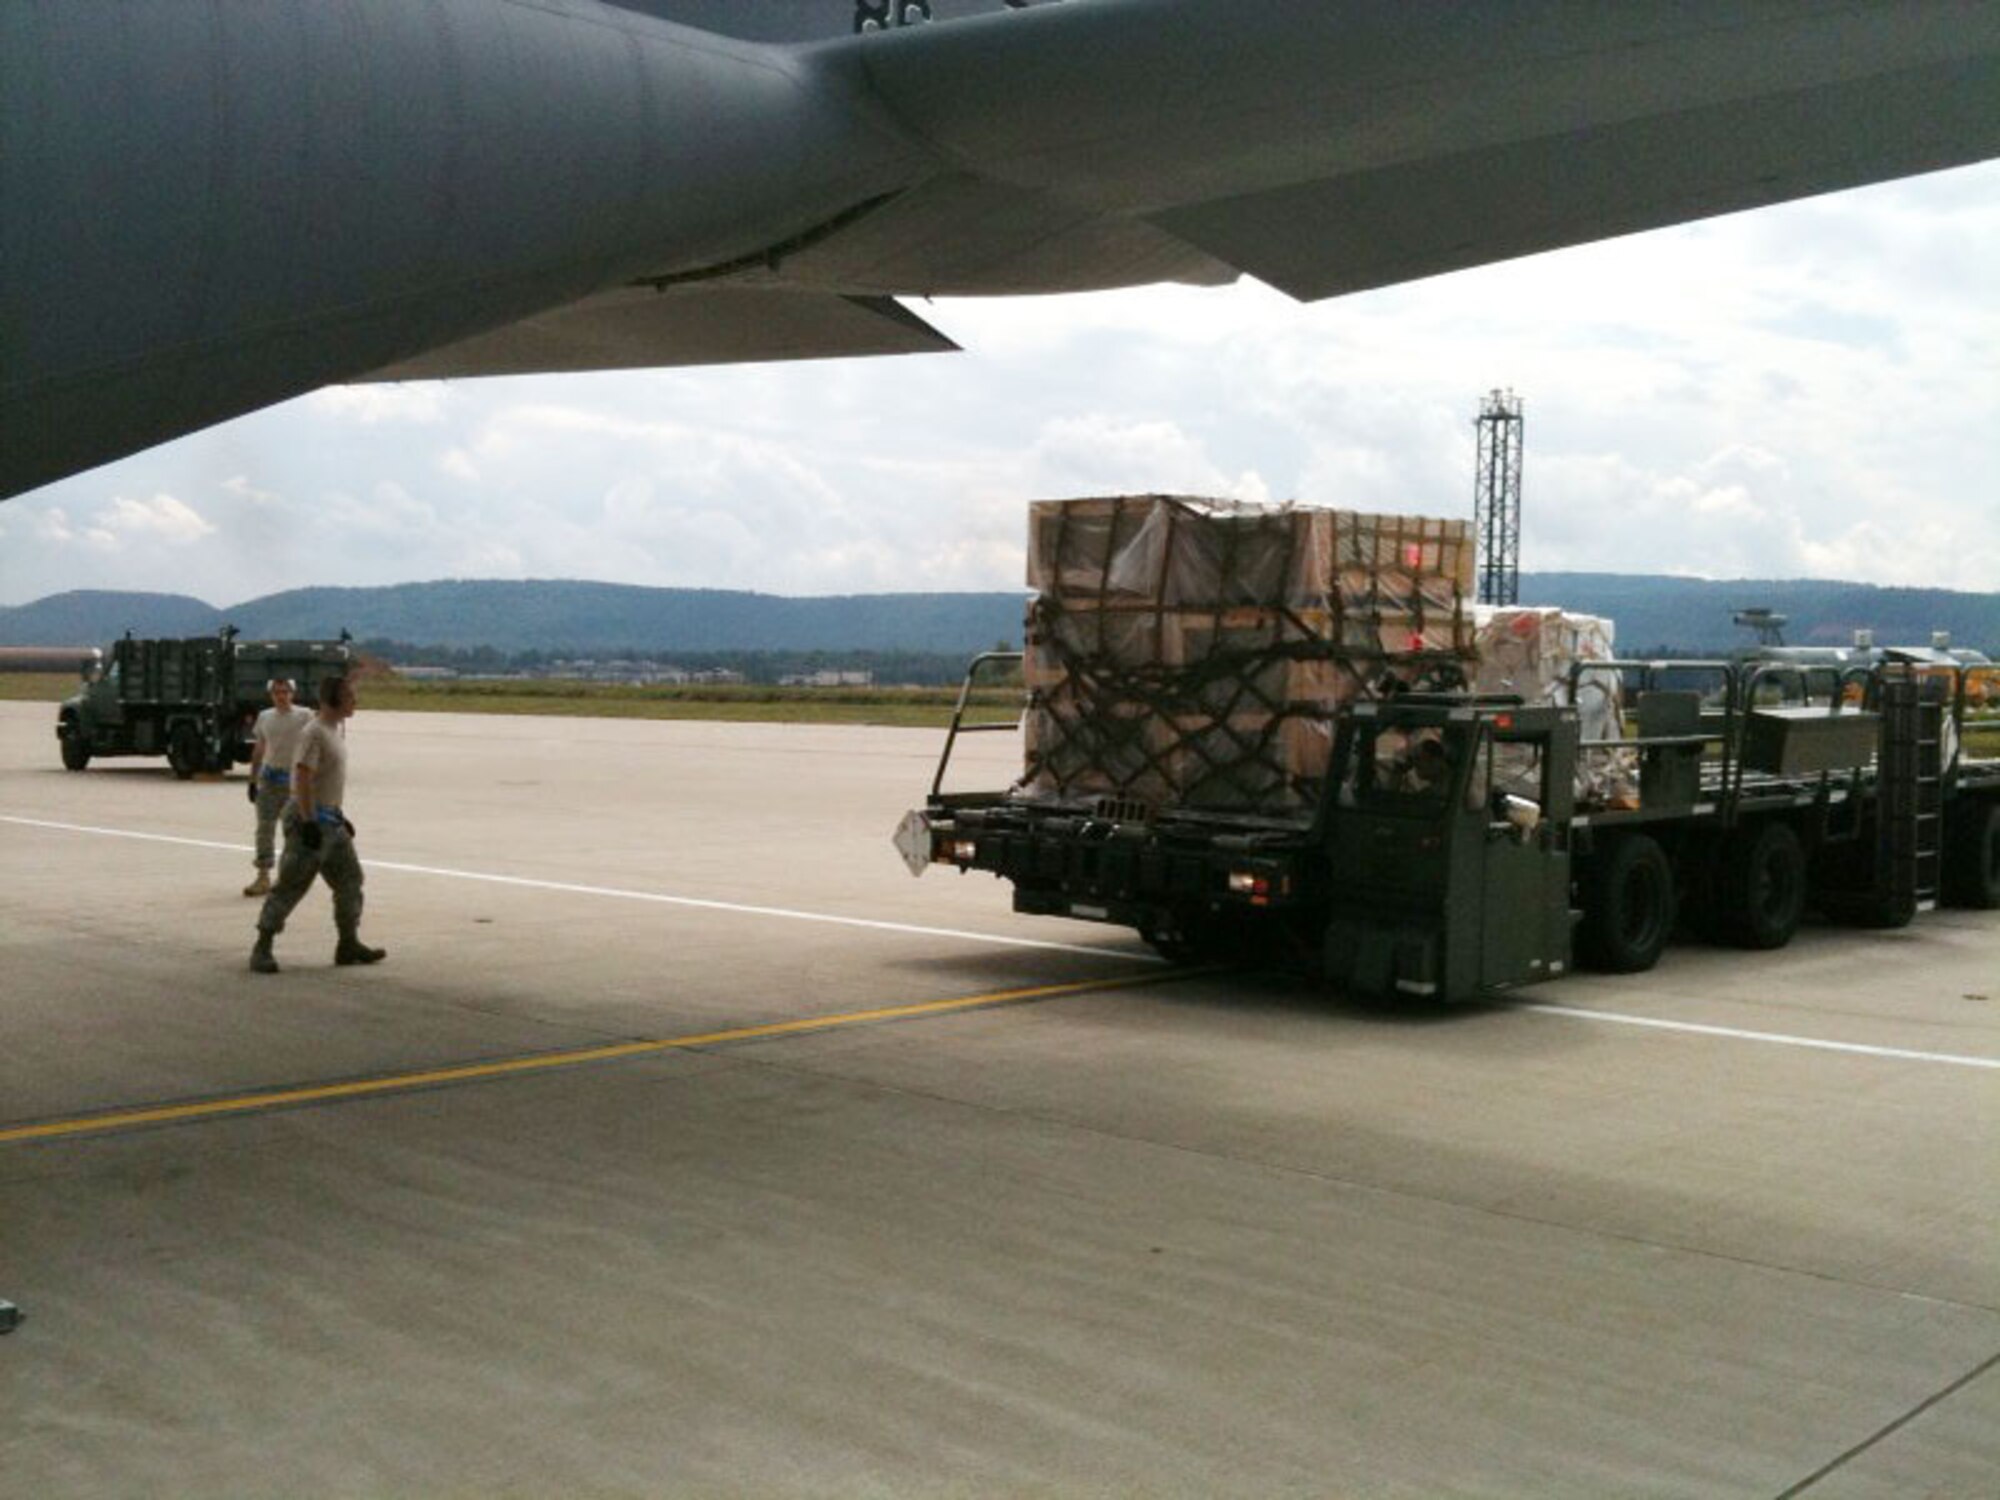 RAMSTEIN AIR BASE, Germany -- Air Force personnel load firefighting equipment onto a C-130J, bound for Russia, here Aug 13, 2010. The equipment is part of a joint U.S. Air Forces Europe, U.S. Naval Forces Europe/Africa, Marine Forces Europe and U.S. Army Europe effort to assist the Russian government in fighting the wildfires in the country. (U.S. Air Force photo by Master Sgt. Keith Houin)